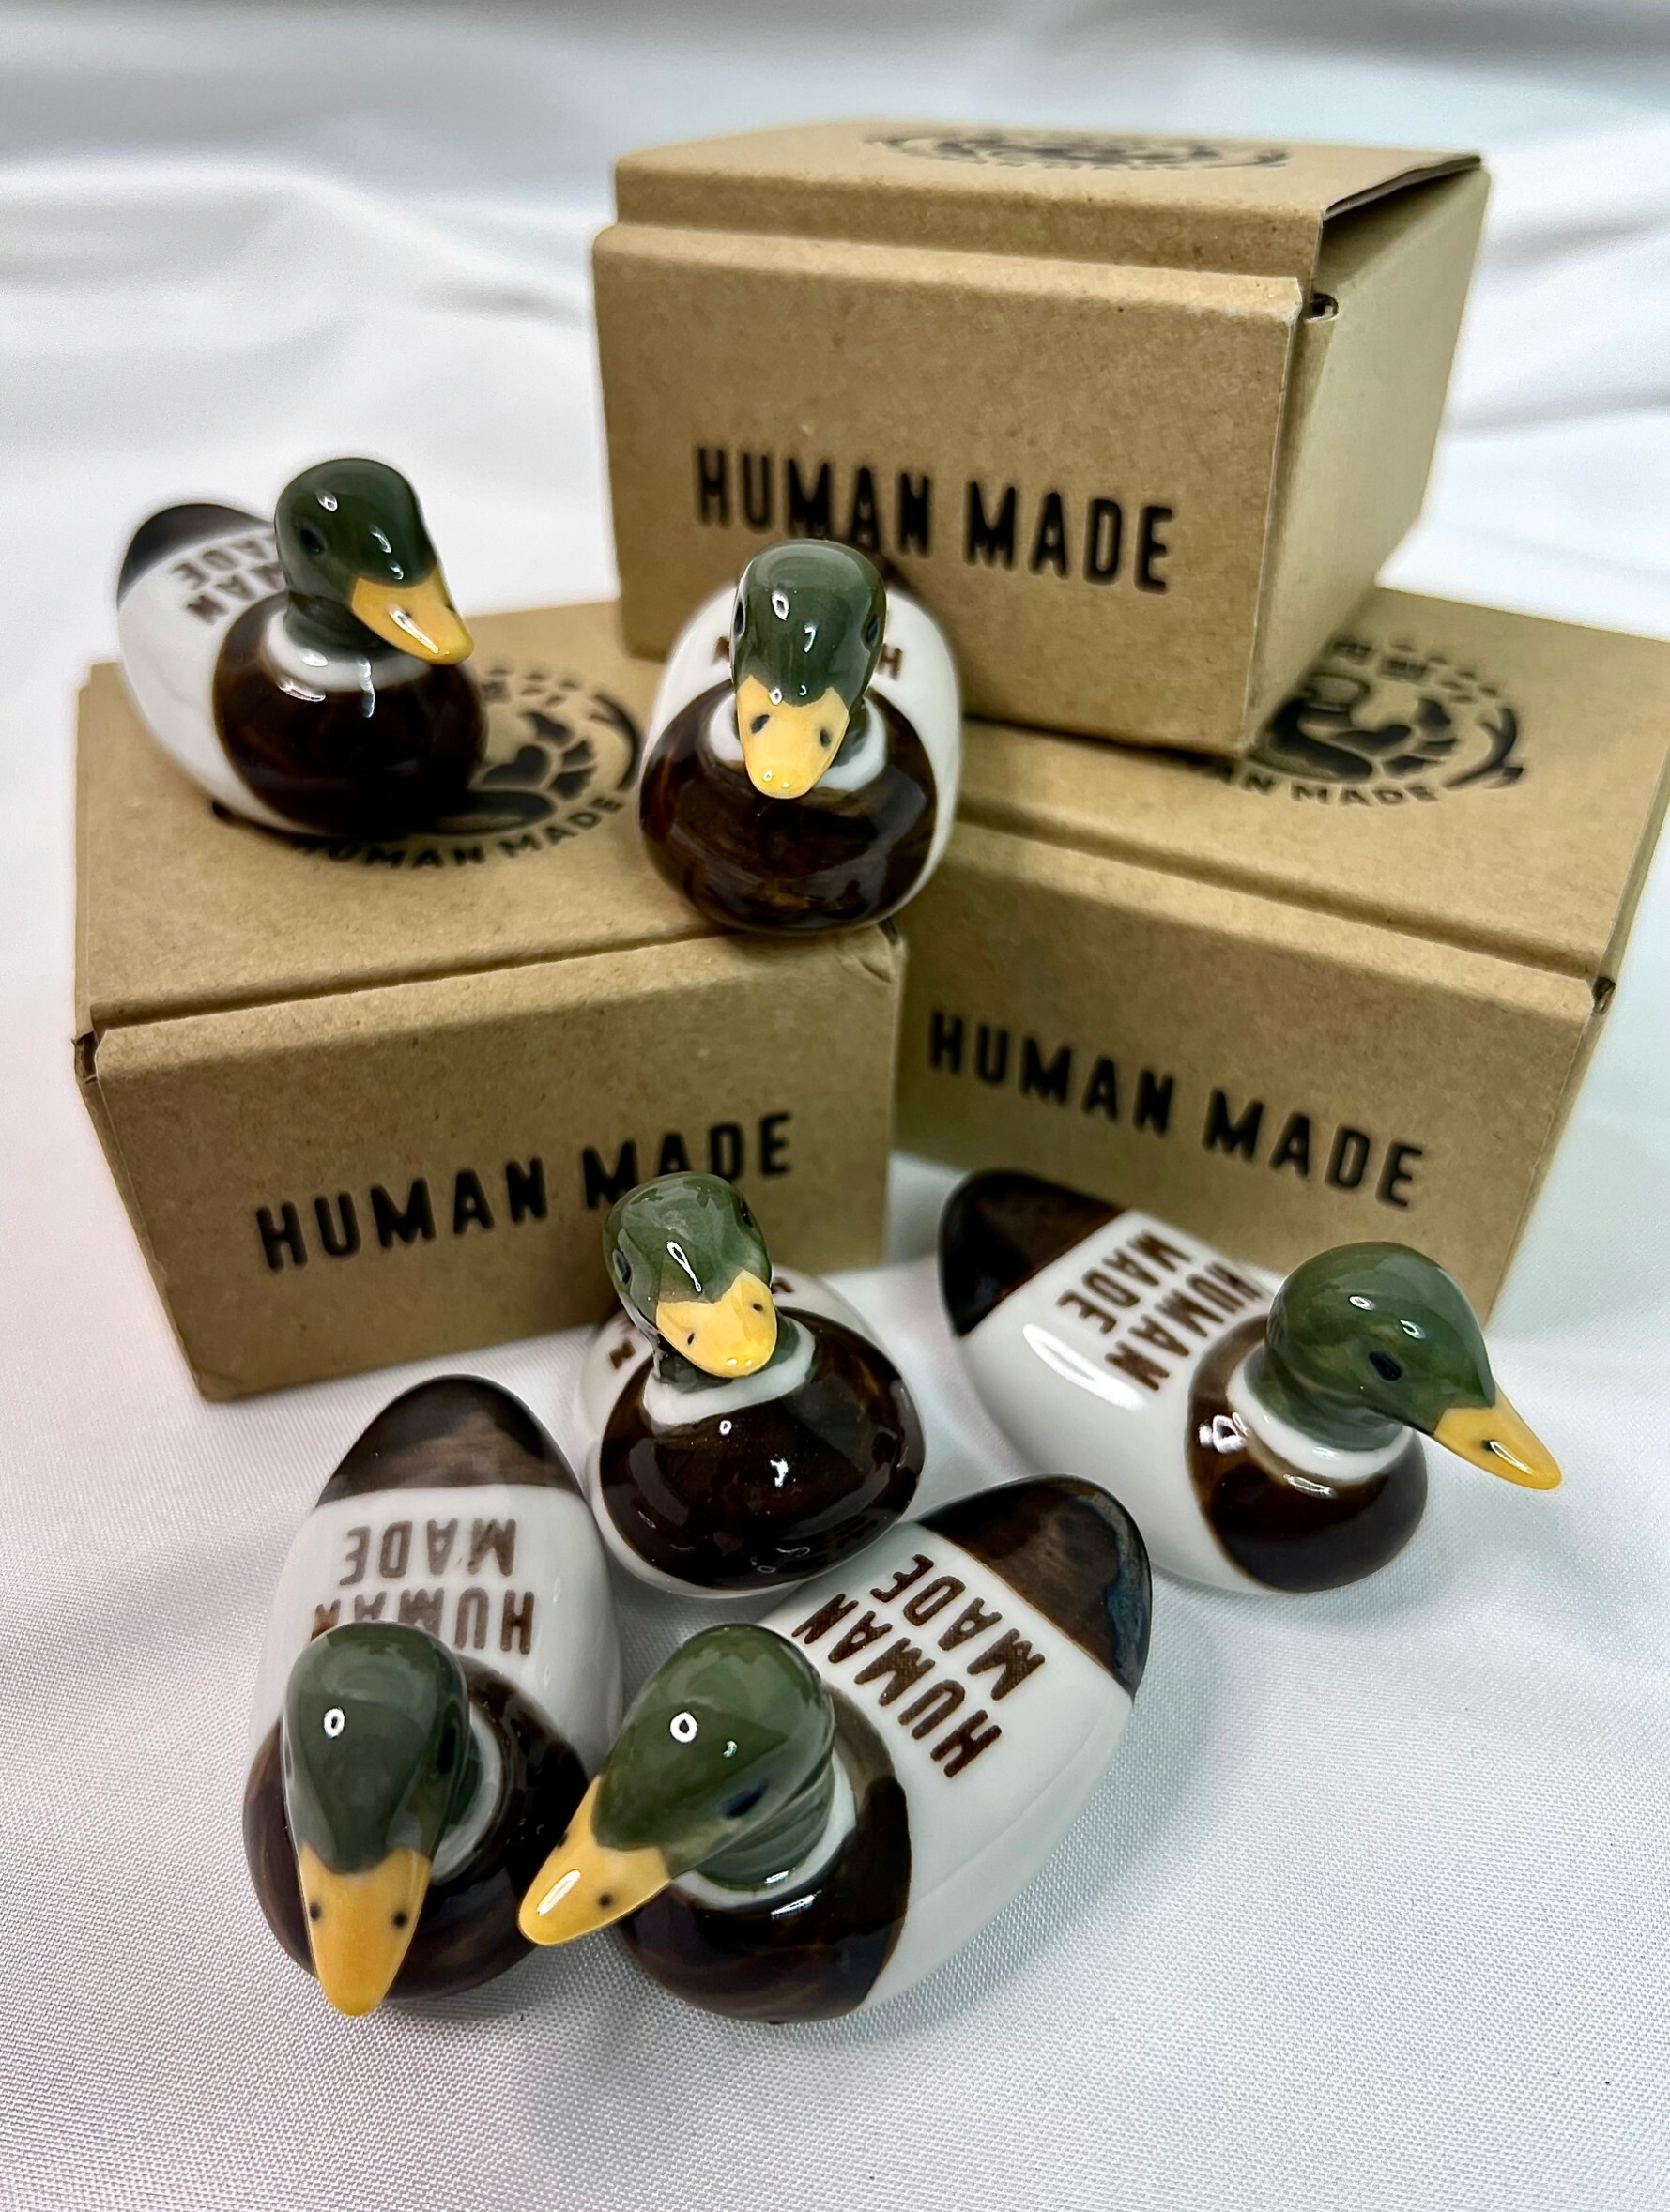 HUMAN MADE RUBBER DUCK - その他